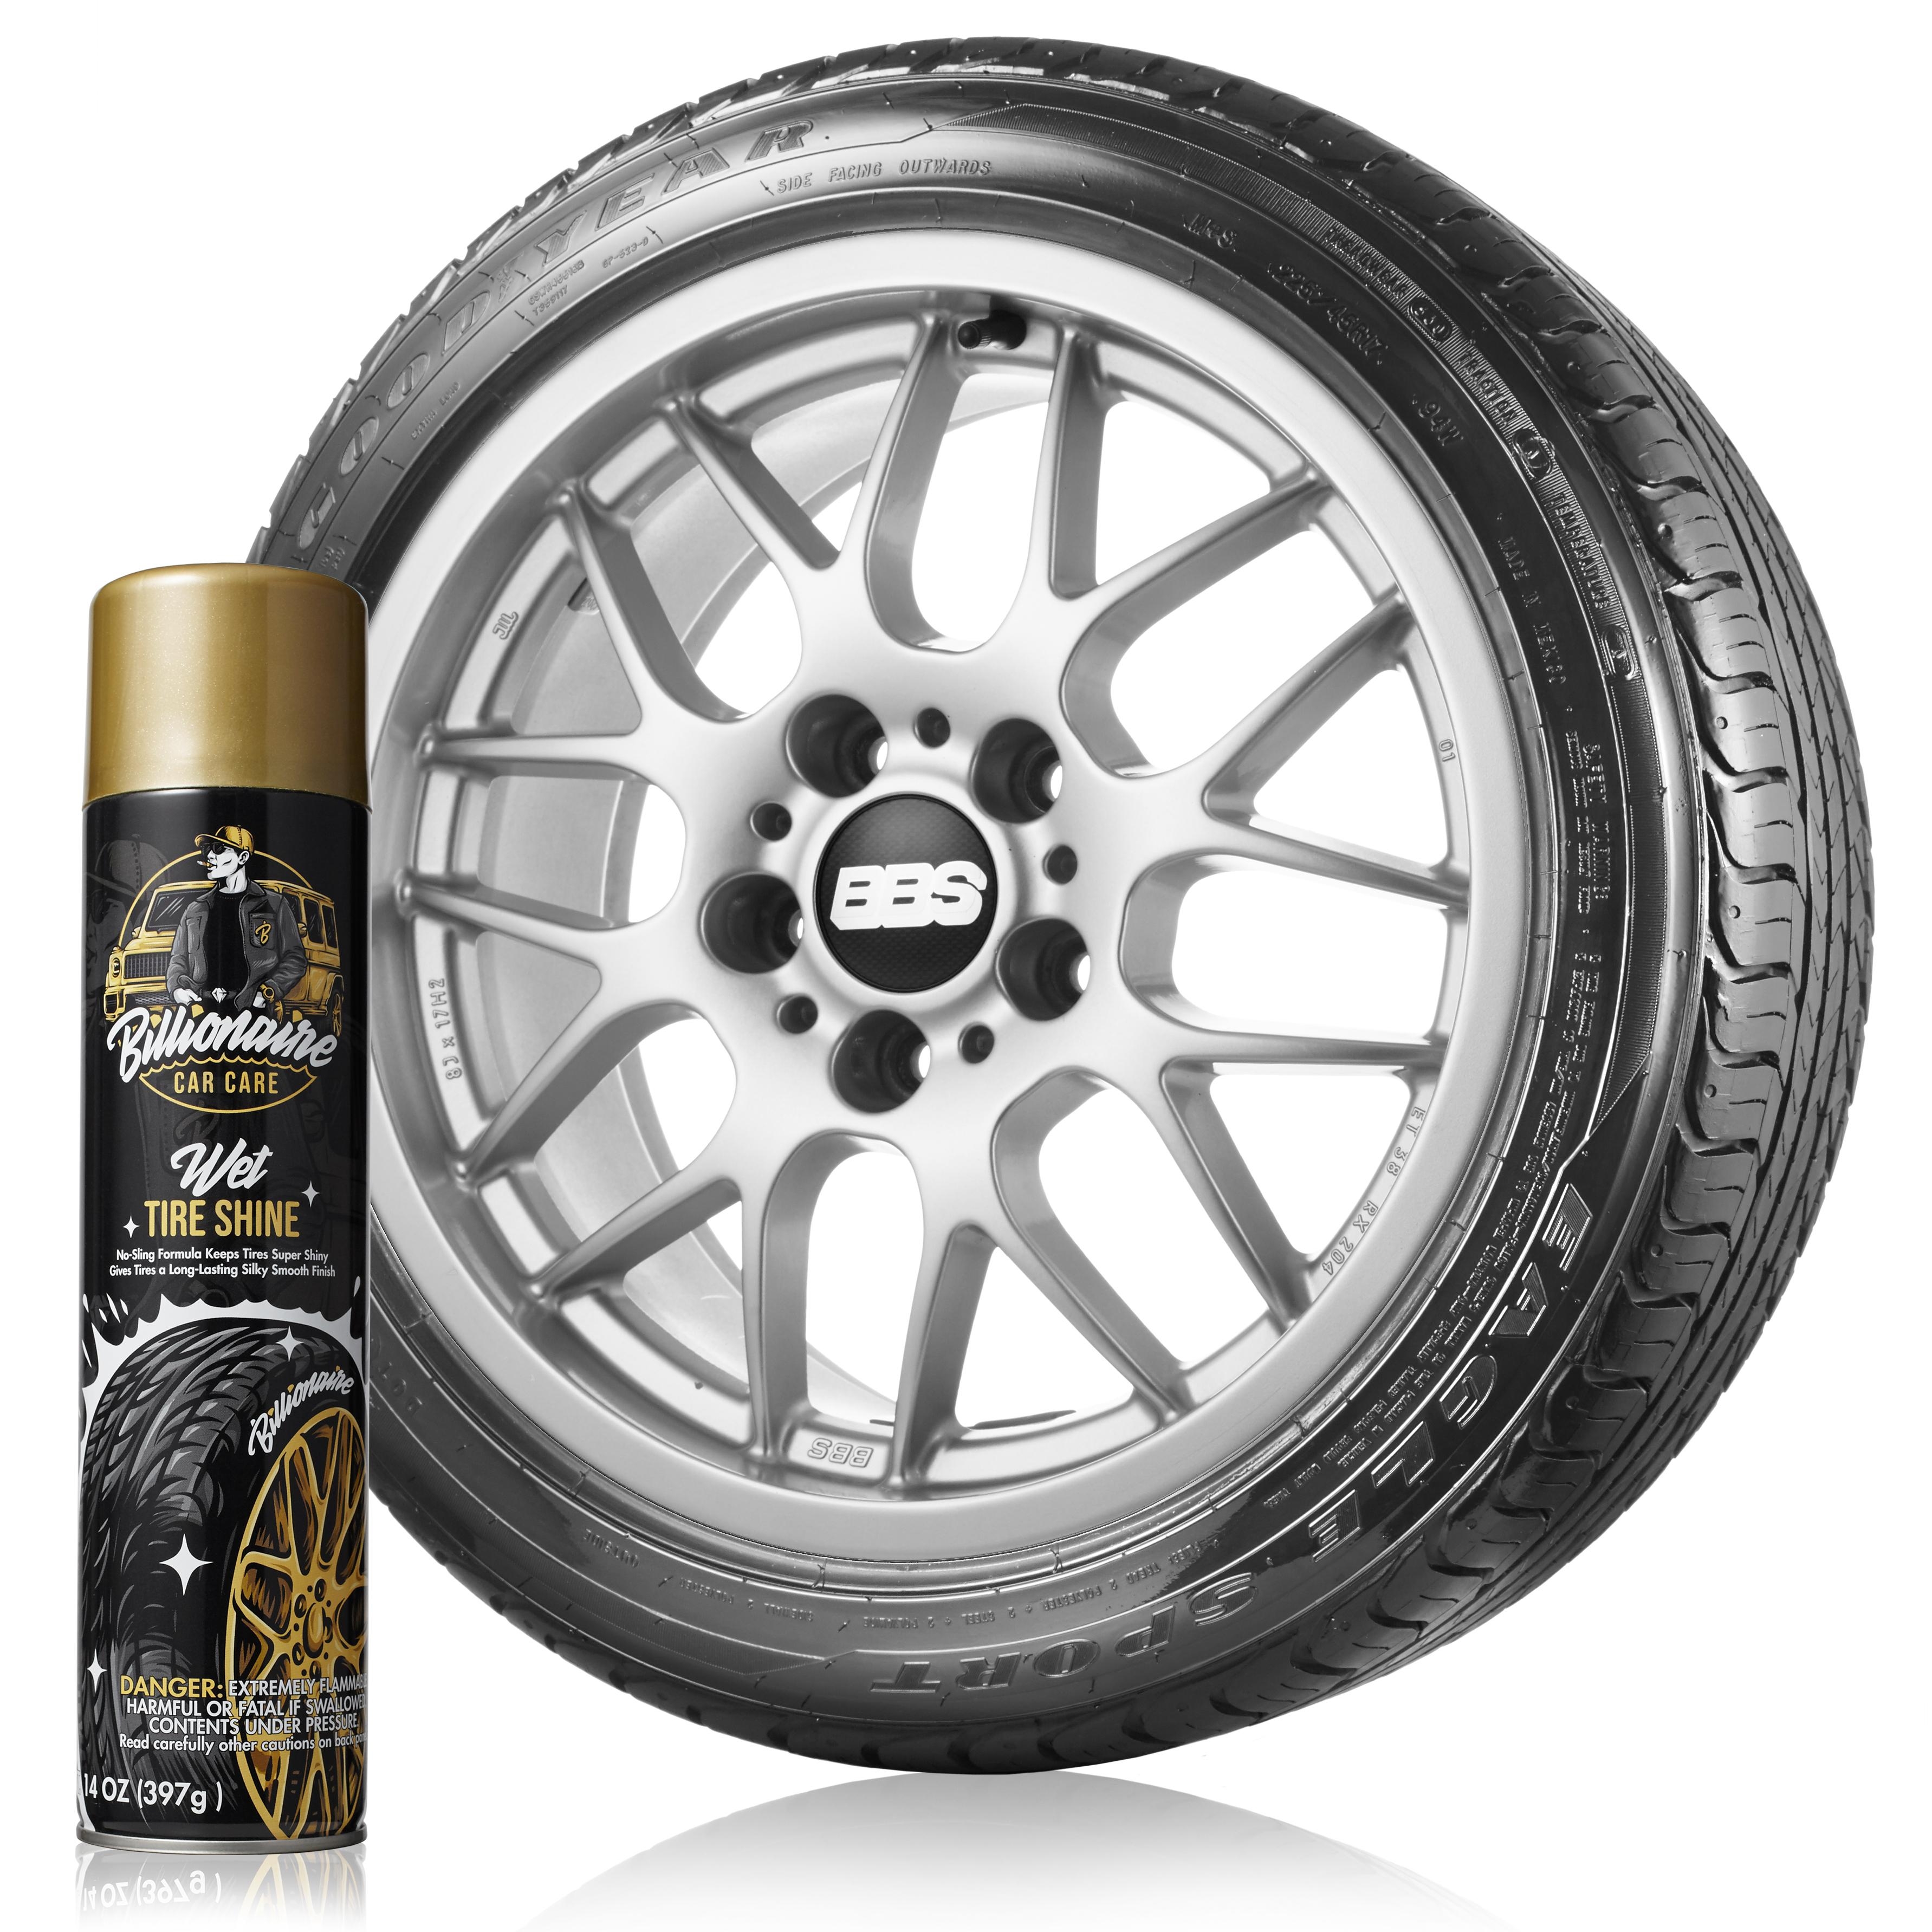 Always Dry Australia - Perma shine by Always Dry is a silicone-free tyre  shine clear coat that outperforms all tyre “dressings”. The tyres will be  restored back to the new black luster